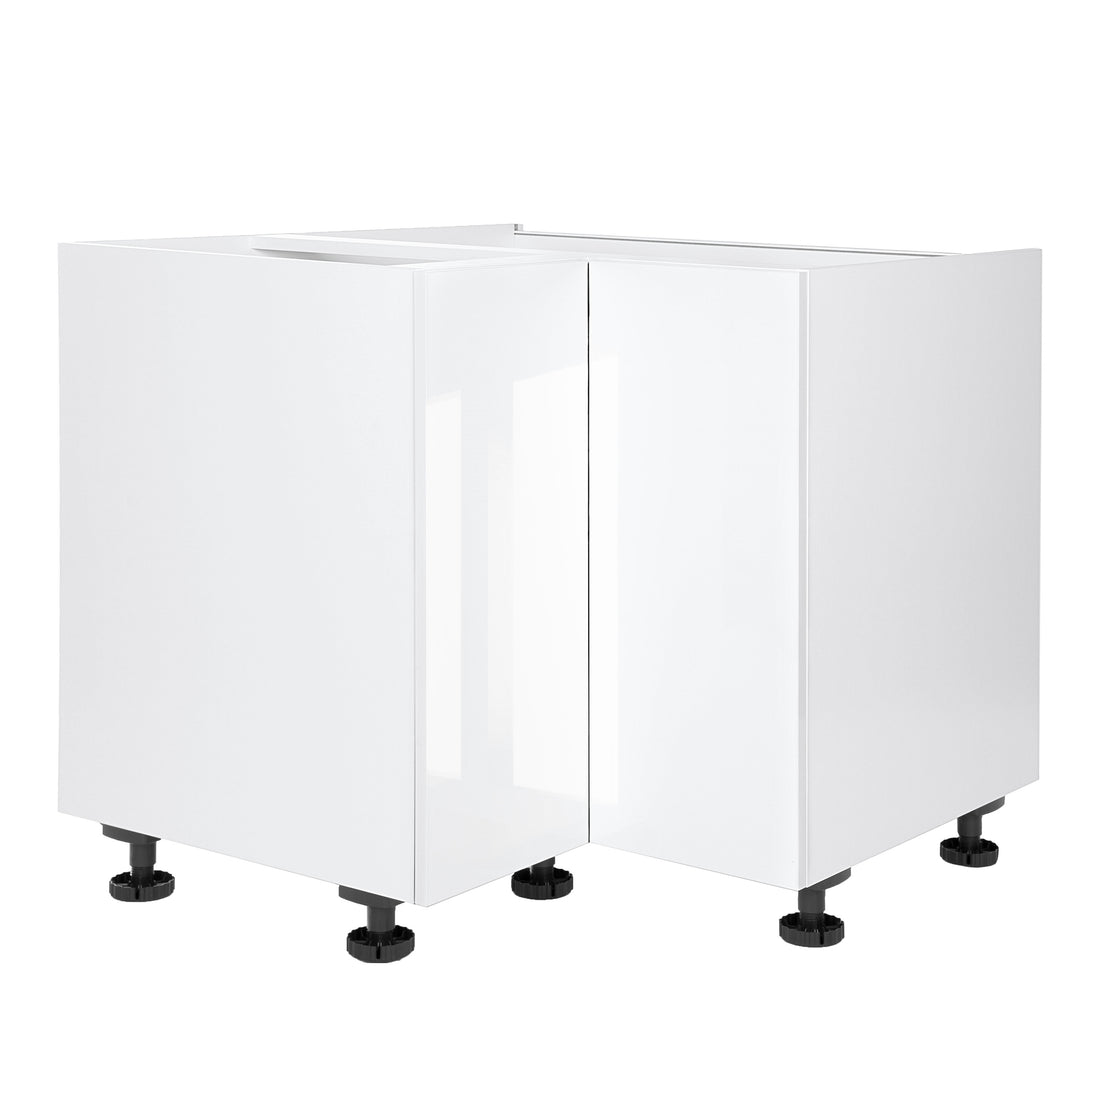 Quick Assemble Modern Style with Soft Close 36 in Lazy Susan Base Kitchen Cabinet (36 in W x 24 in D x 34.50 in H) -  Pro-Edge HD